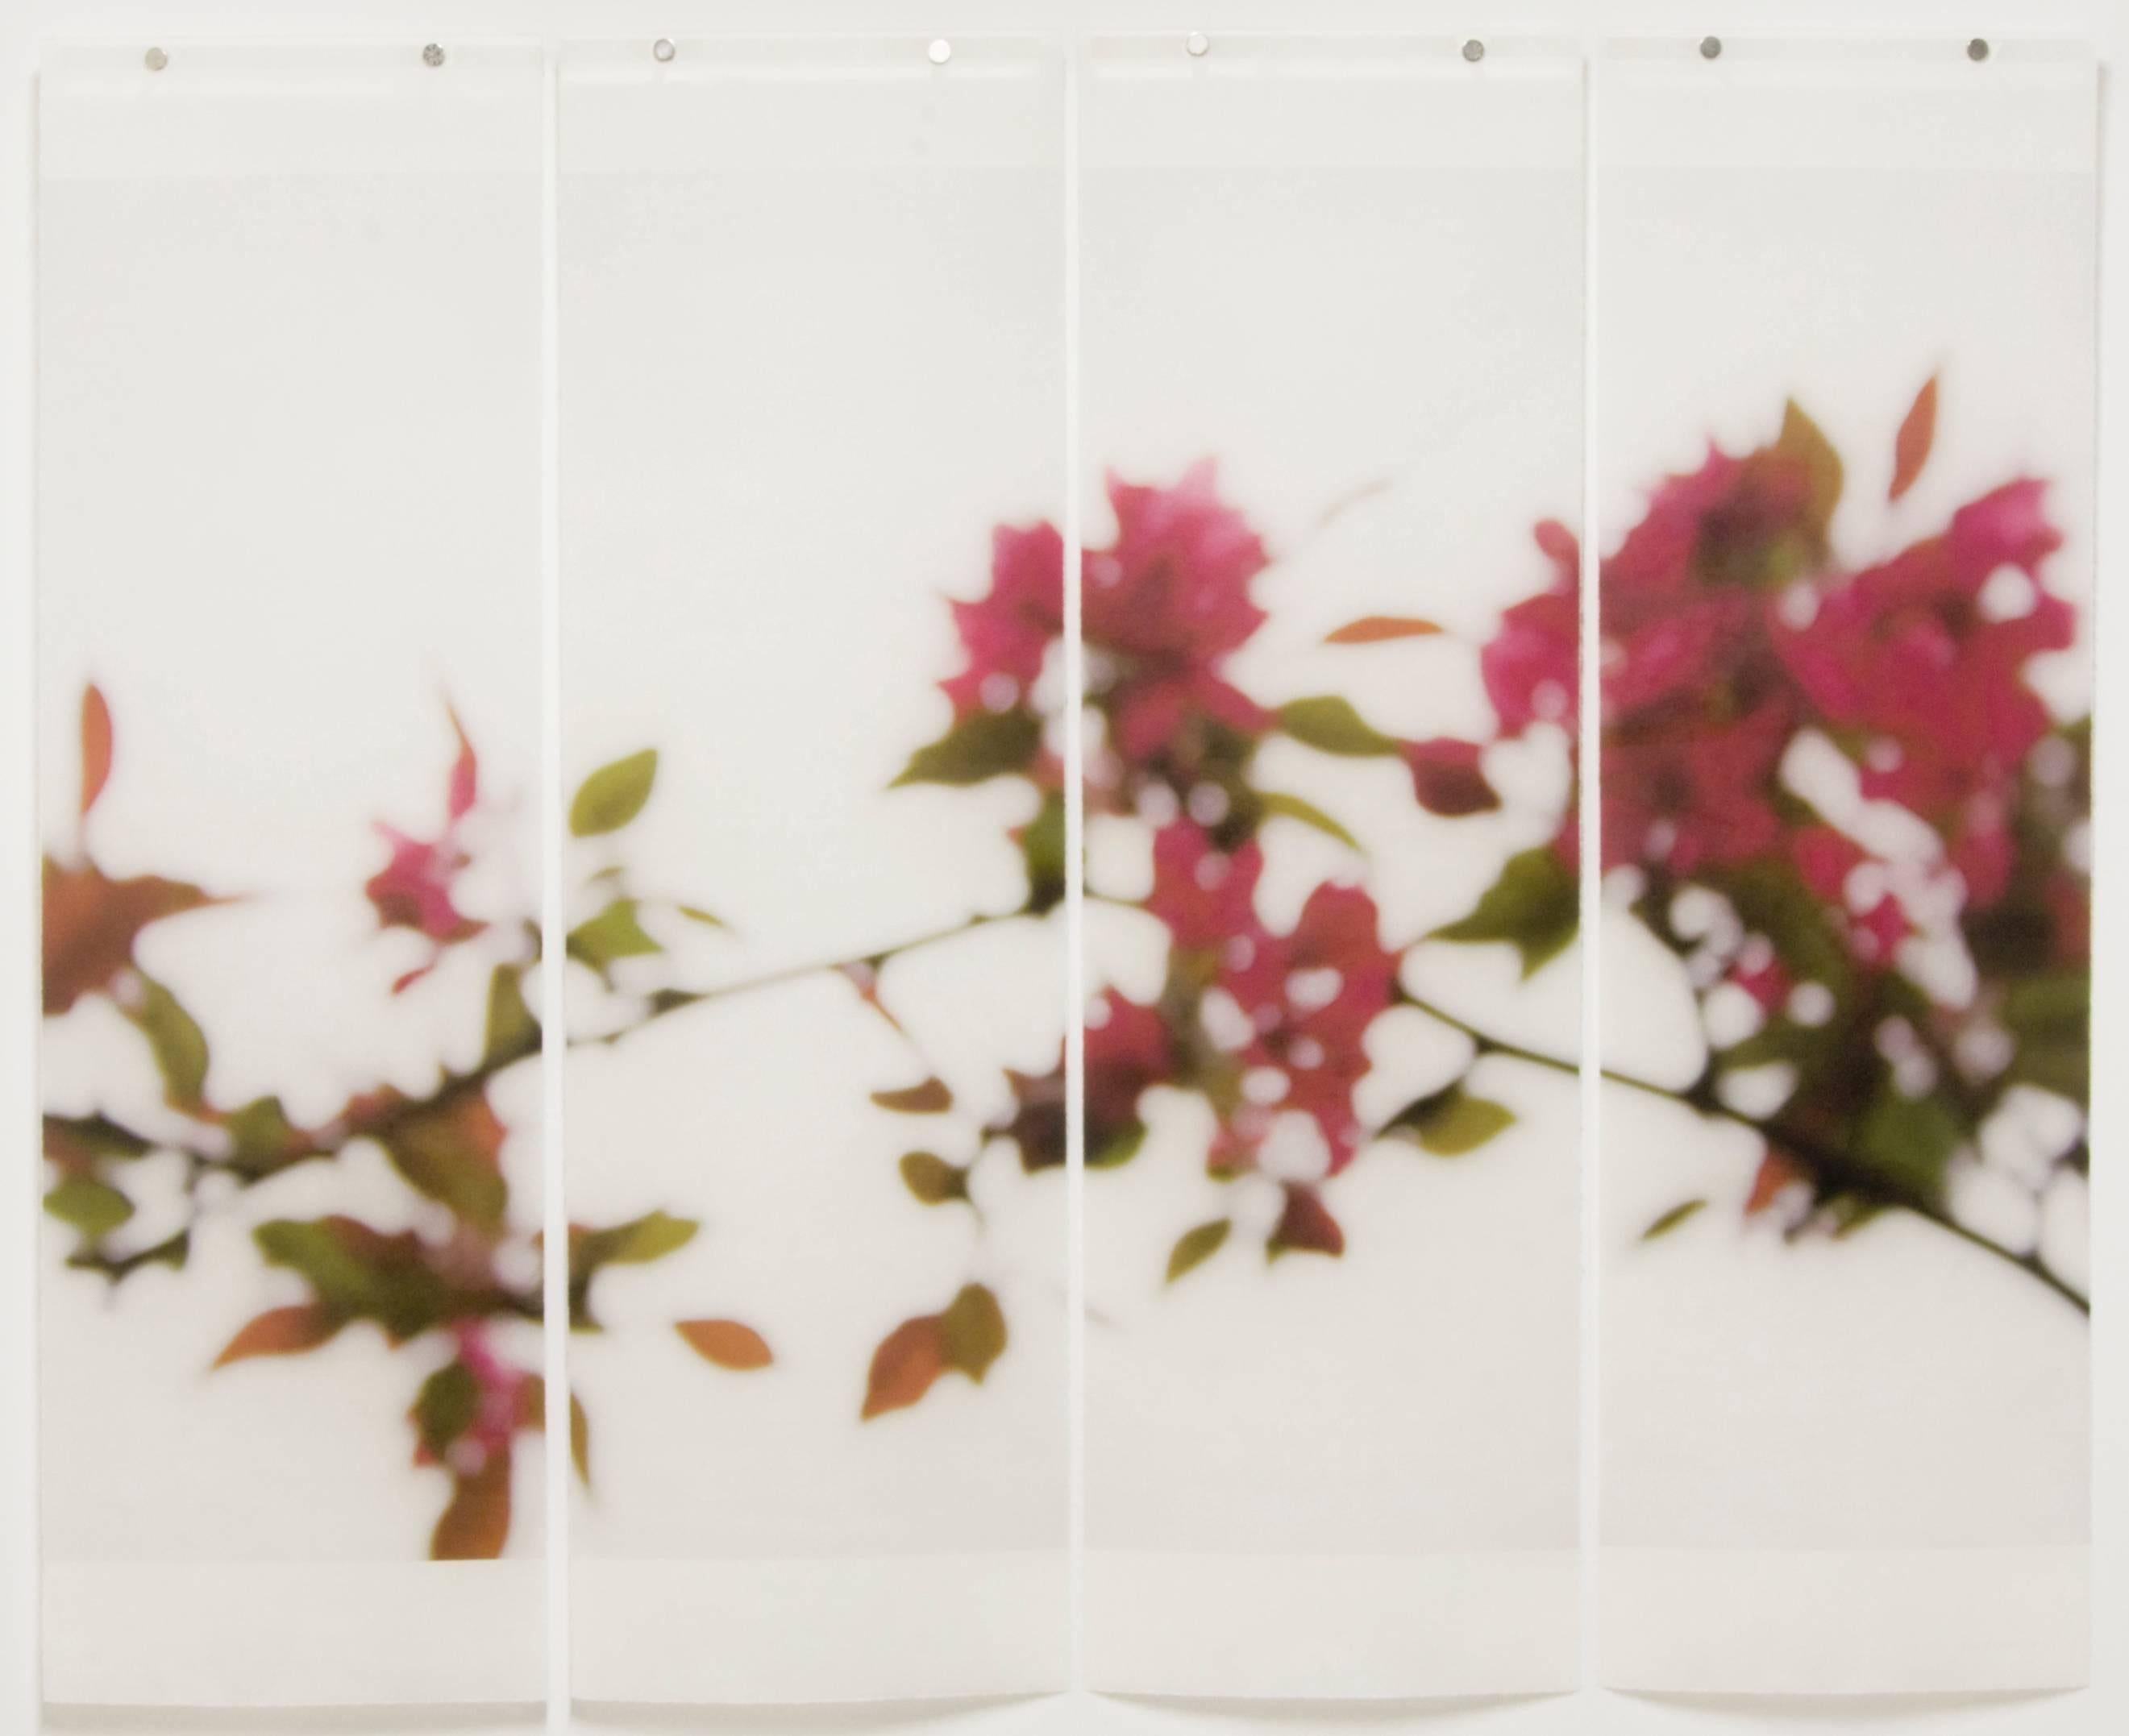 Jeri Eisenberg
Crabapple, 2008
archival pigment ink on Japanese paper infused with encaustic medium
36 x 46 in.
(quad)
6/12

This archival pigment printed on kozo paper features abstracted pink flowers on a trees branch against a white background.